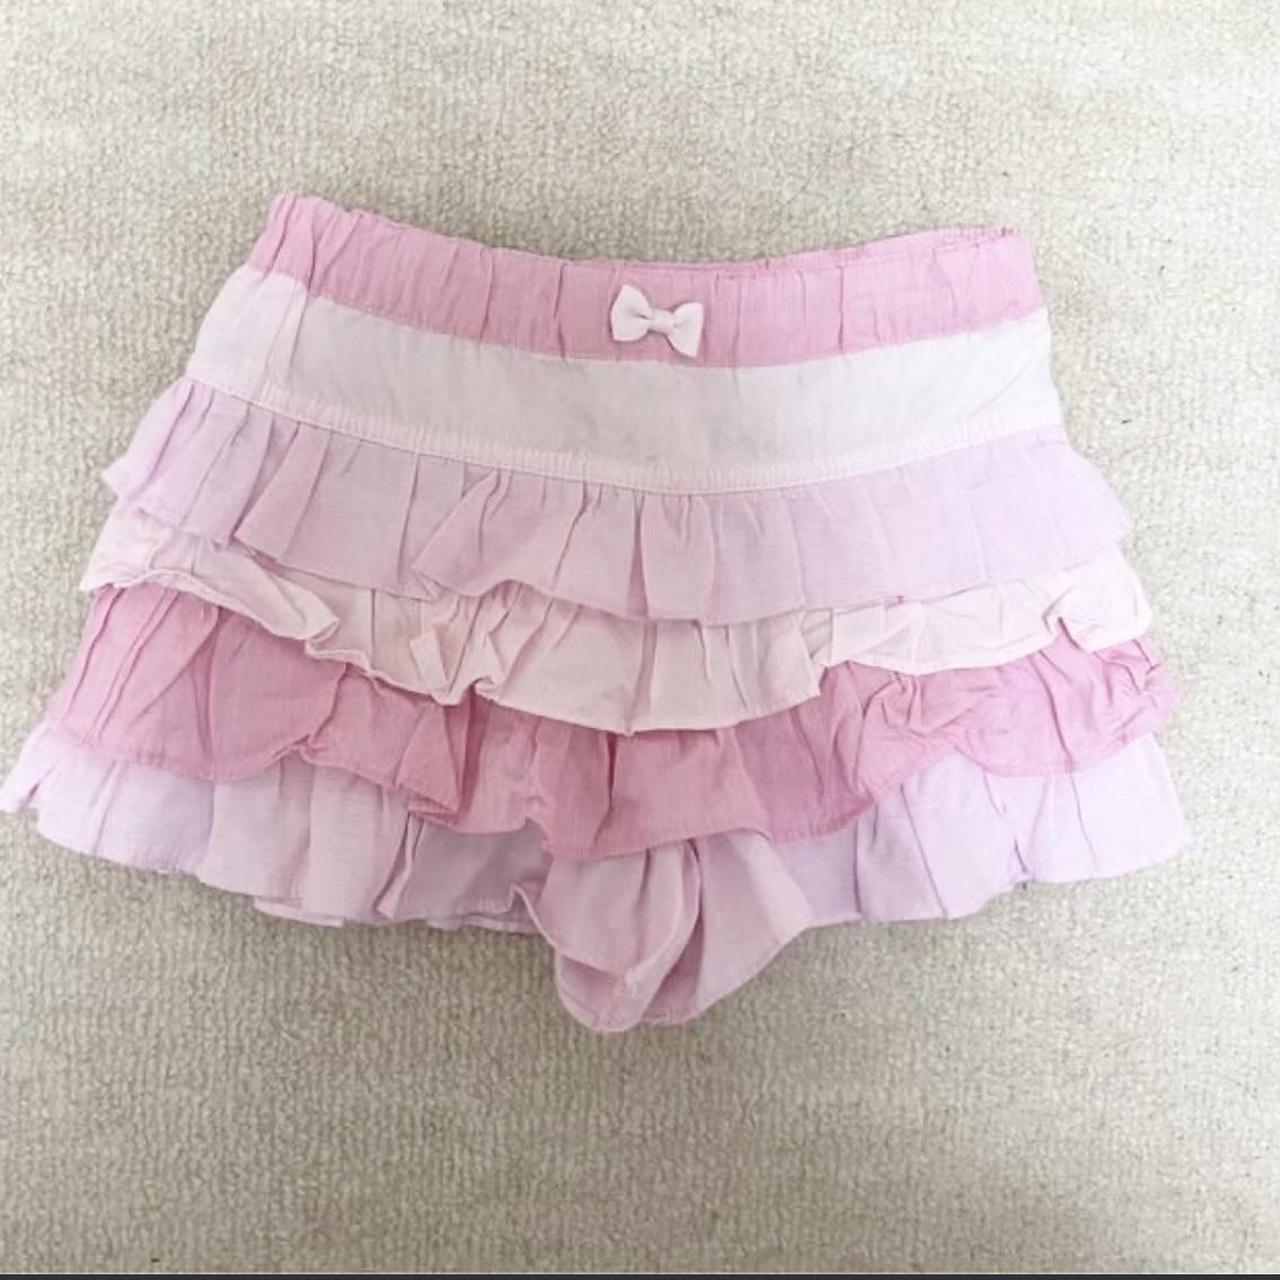 giant ISO ! mezzo piano pink layered skirt- or any... - Depop